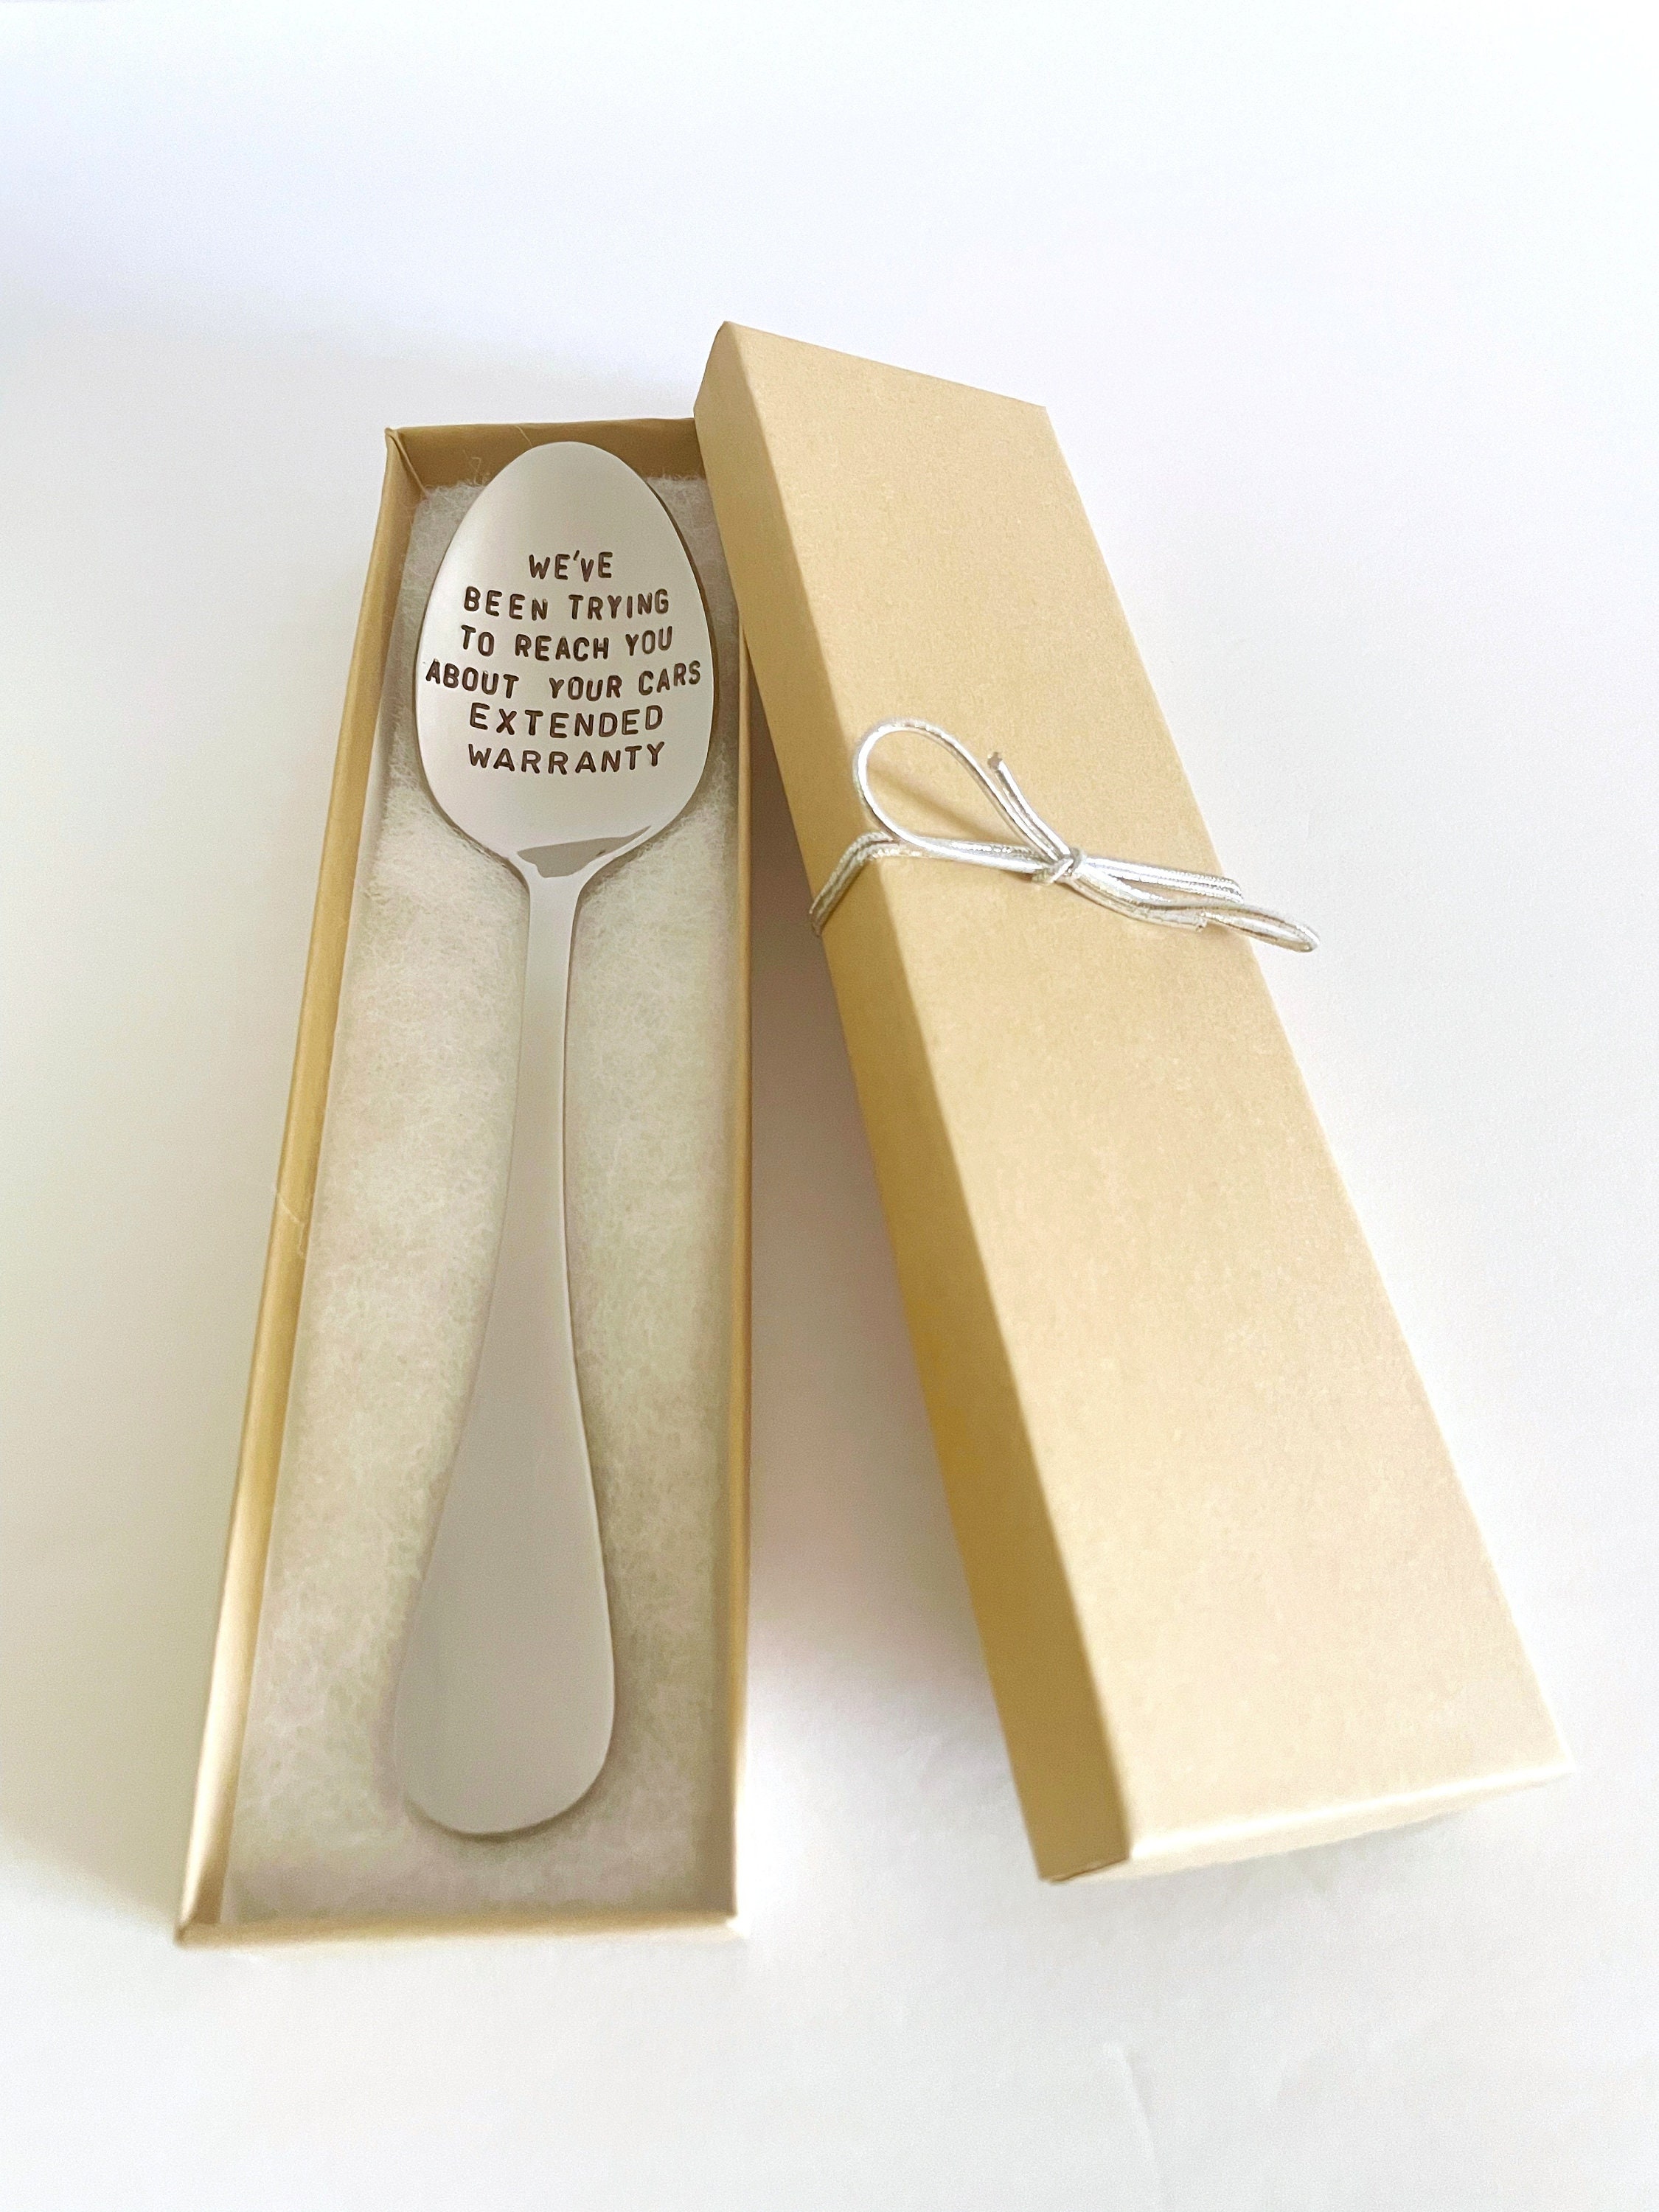 Peanut Butter Spoon Gifts for Women Men Peanut Butter Lovers  Gifts for Couple Gifts for Boy Girl Gifts for Husband Pb Spoons Engraved My Peanut  Butter Spoon Gifts: Spoons